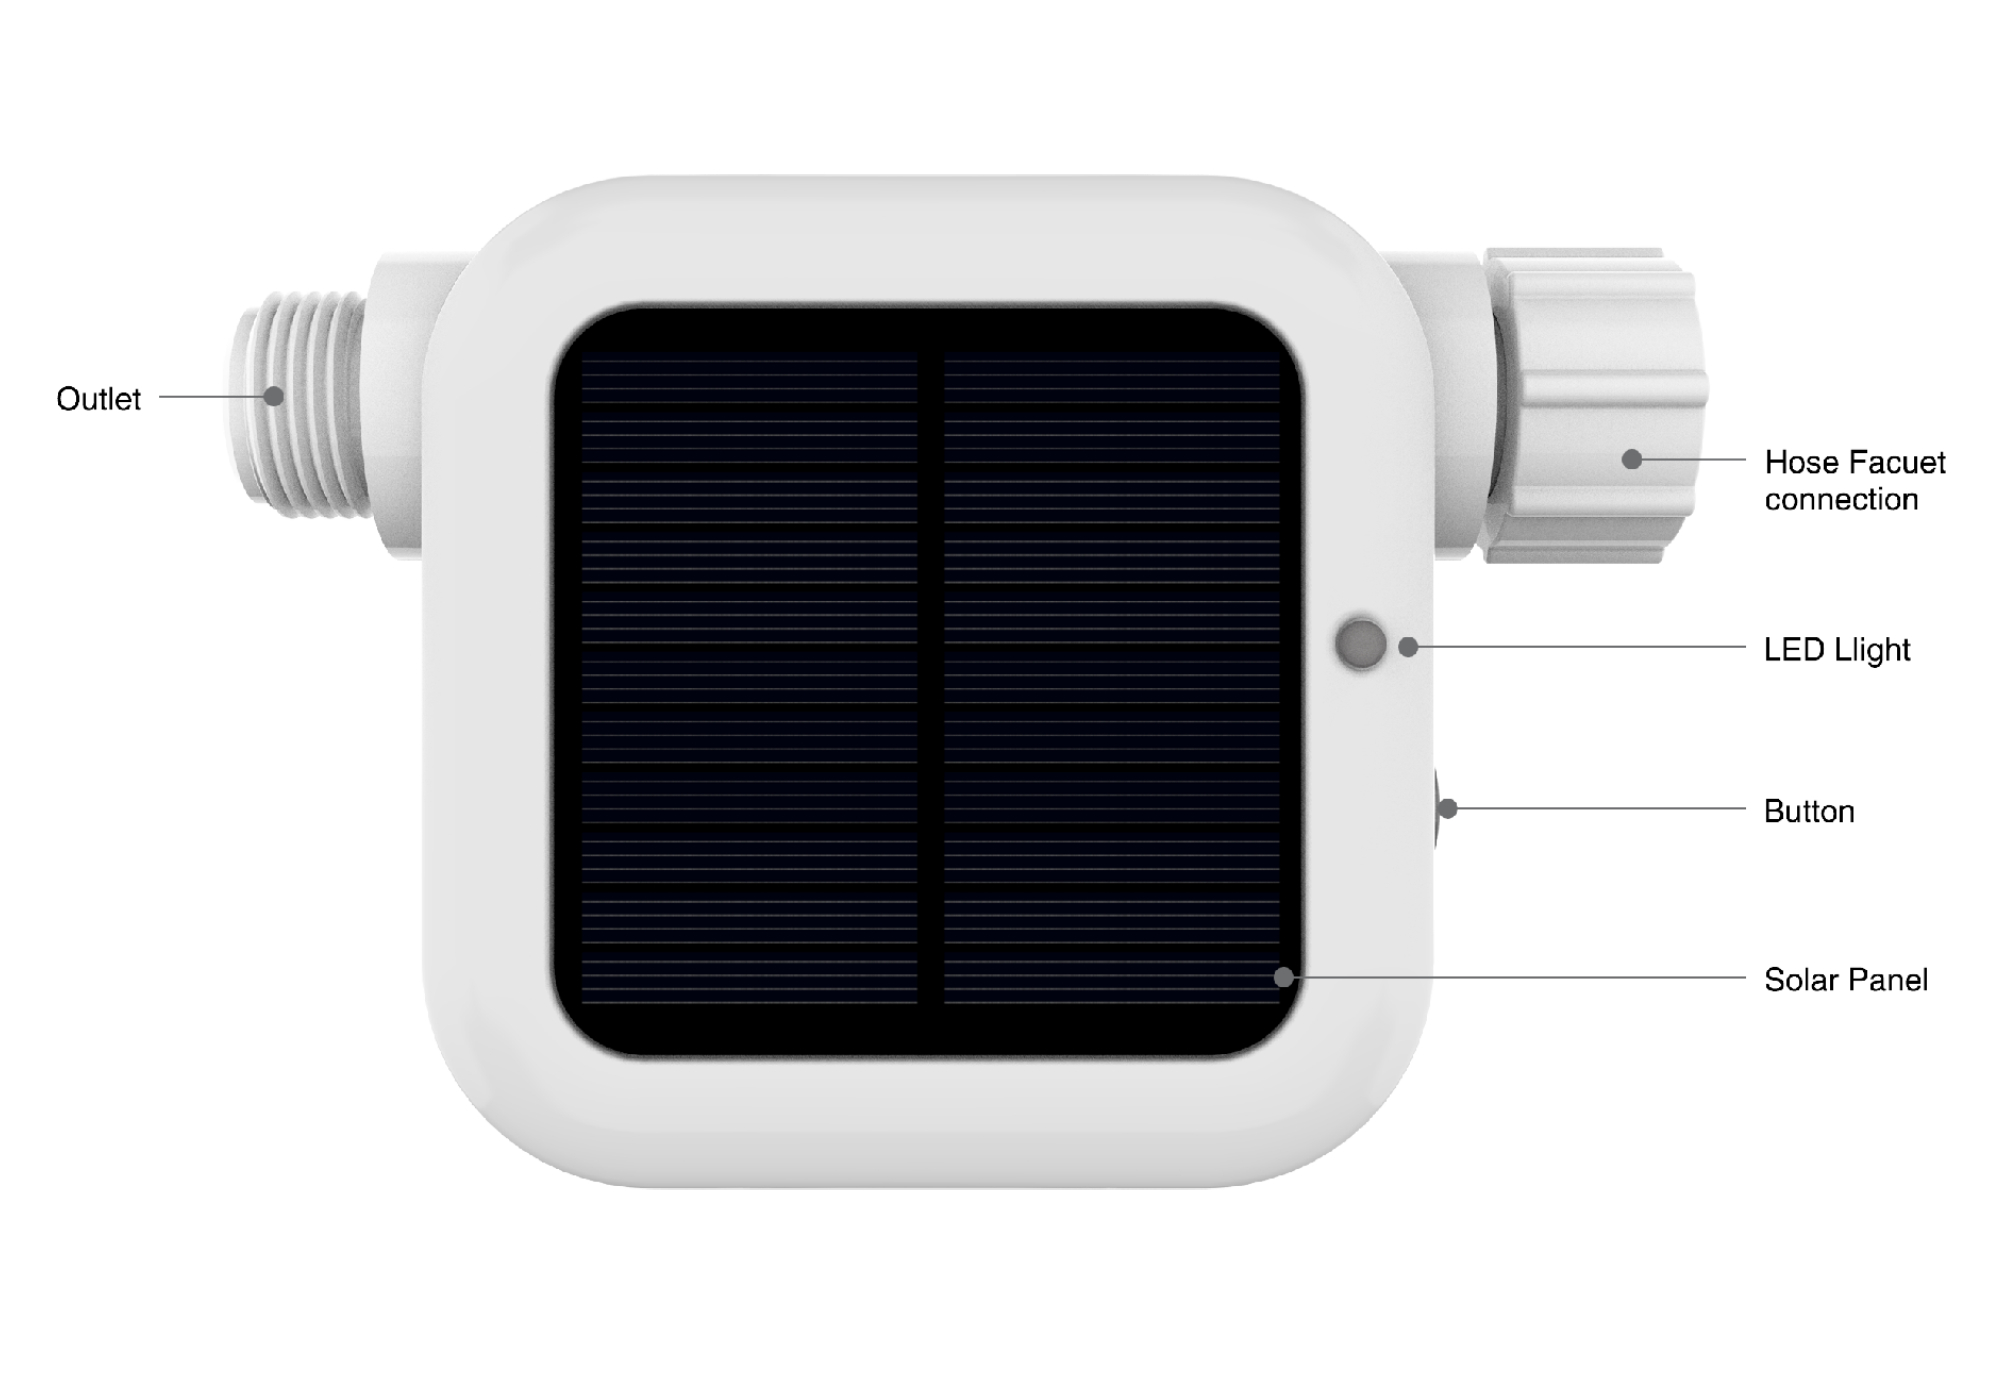 The appearance of Netro Pixie is that of three-dimensional with dimensions of length 6.5 inches, width 4.3 inches and height 1.9 inches. One end of Netro Pixie is connected to the Hose Faucet, and the other end serves as the water outlet. On the front of Netro Pixie, there is a solar panel and a circular LED light. On the side of Netro Pixie, there is a circular function button.